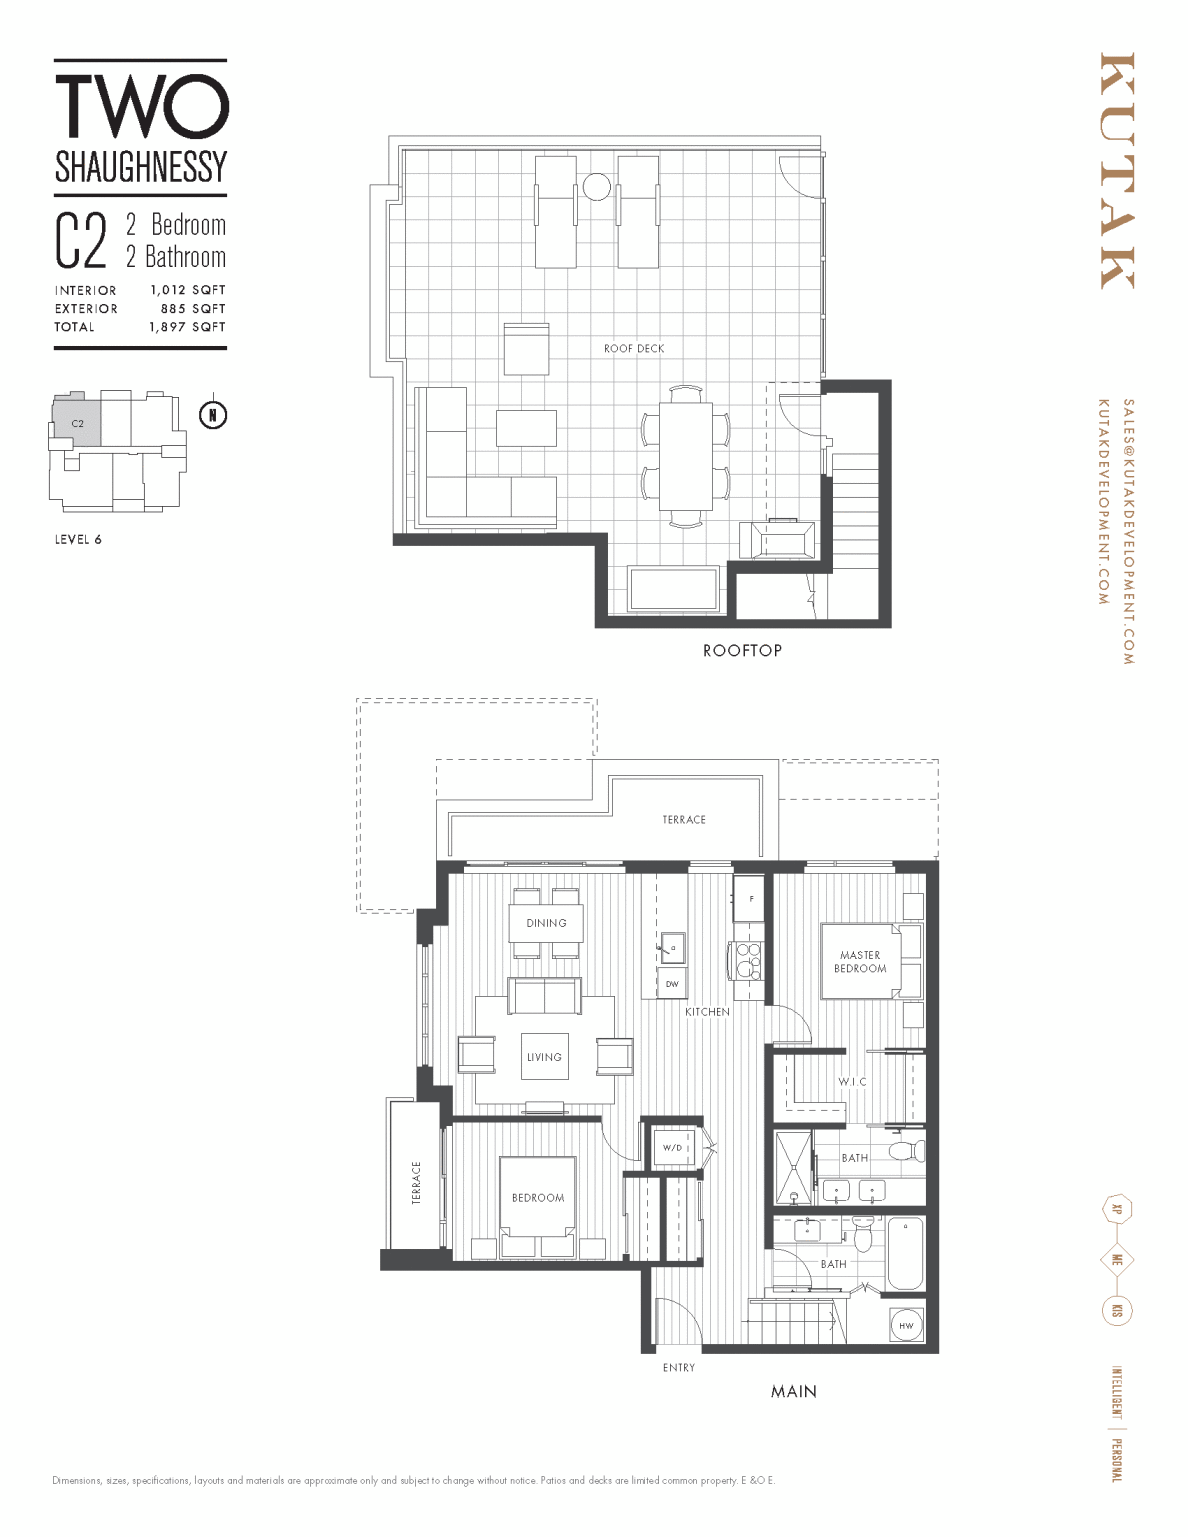 Two Shaughnessy Floor Plan C2